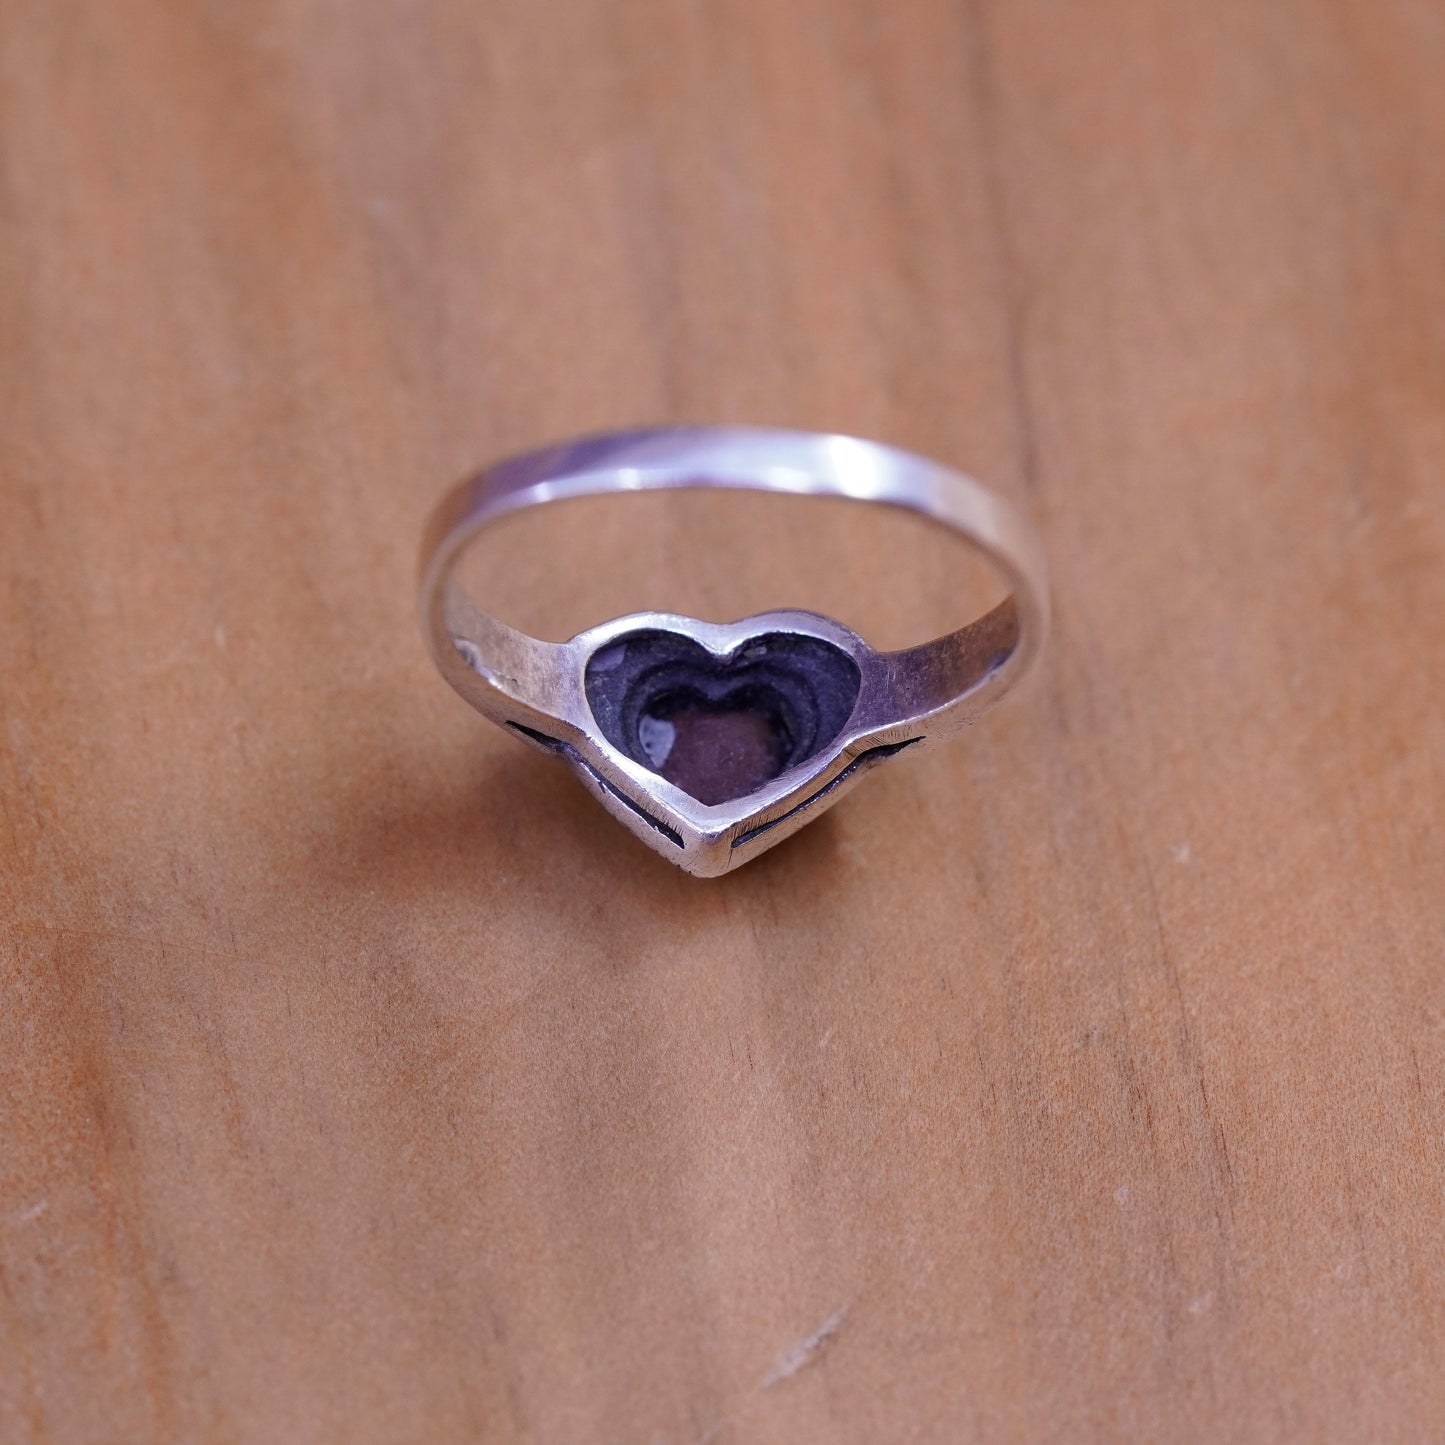 Size 6.25, Sterling 925 silver handmade ring with heart amethyst and marcasite